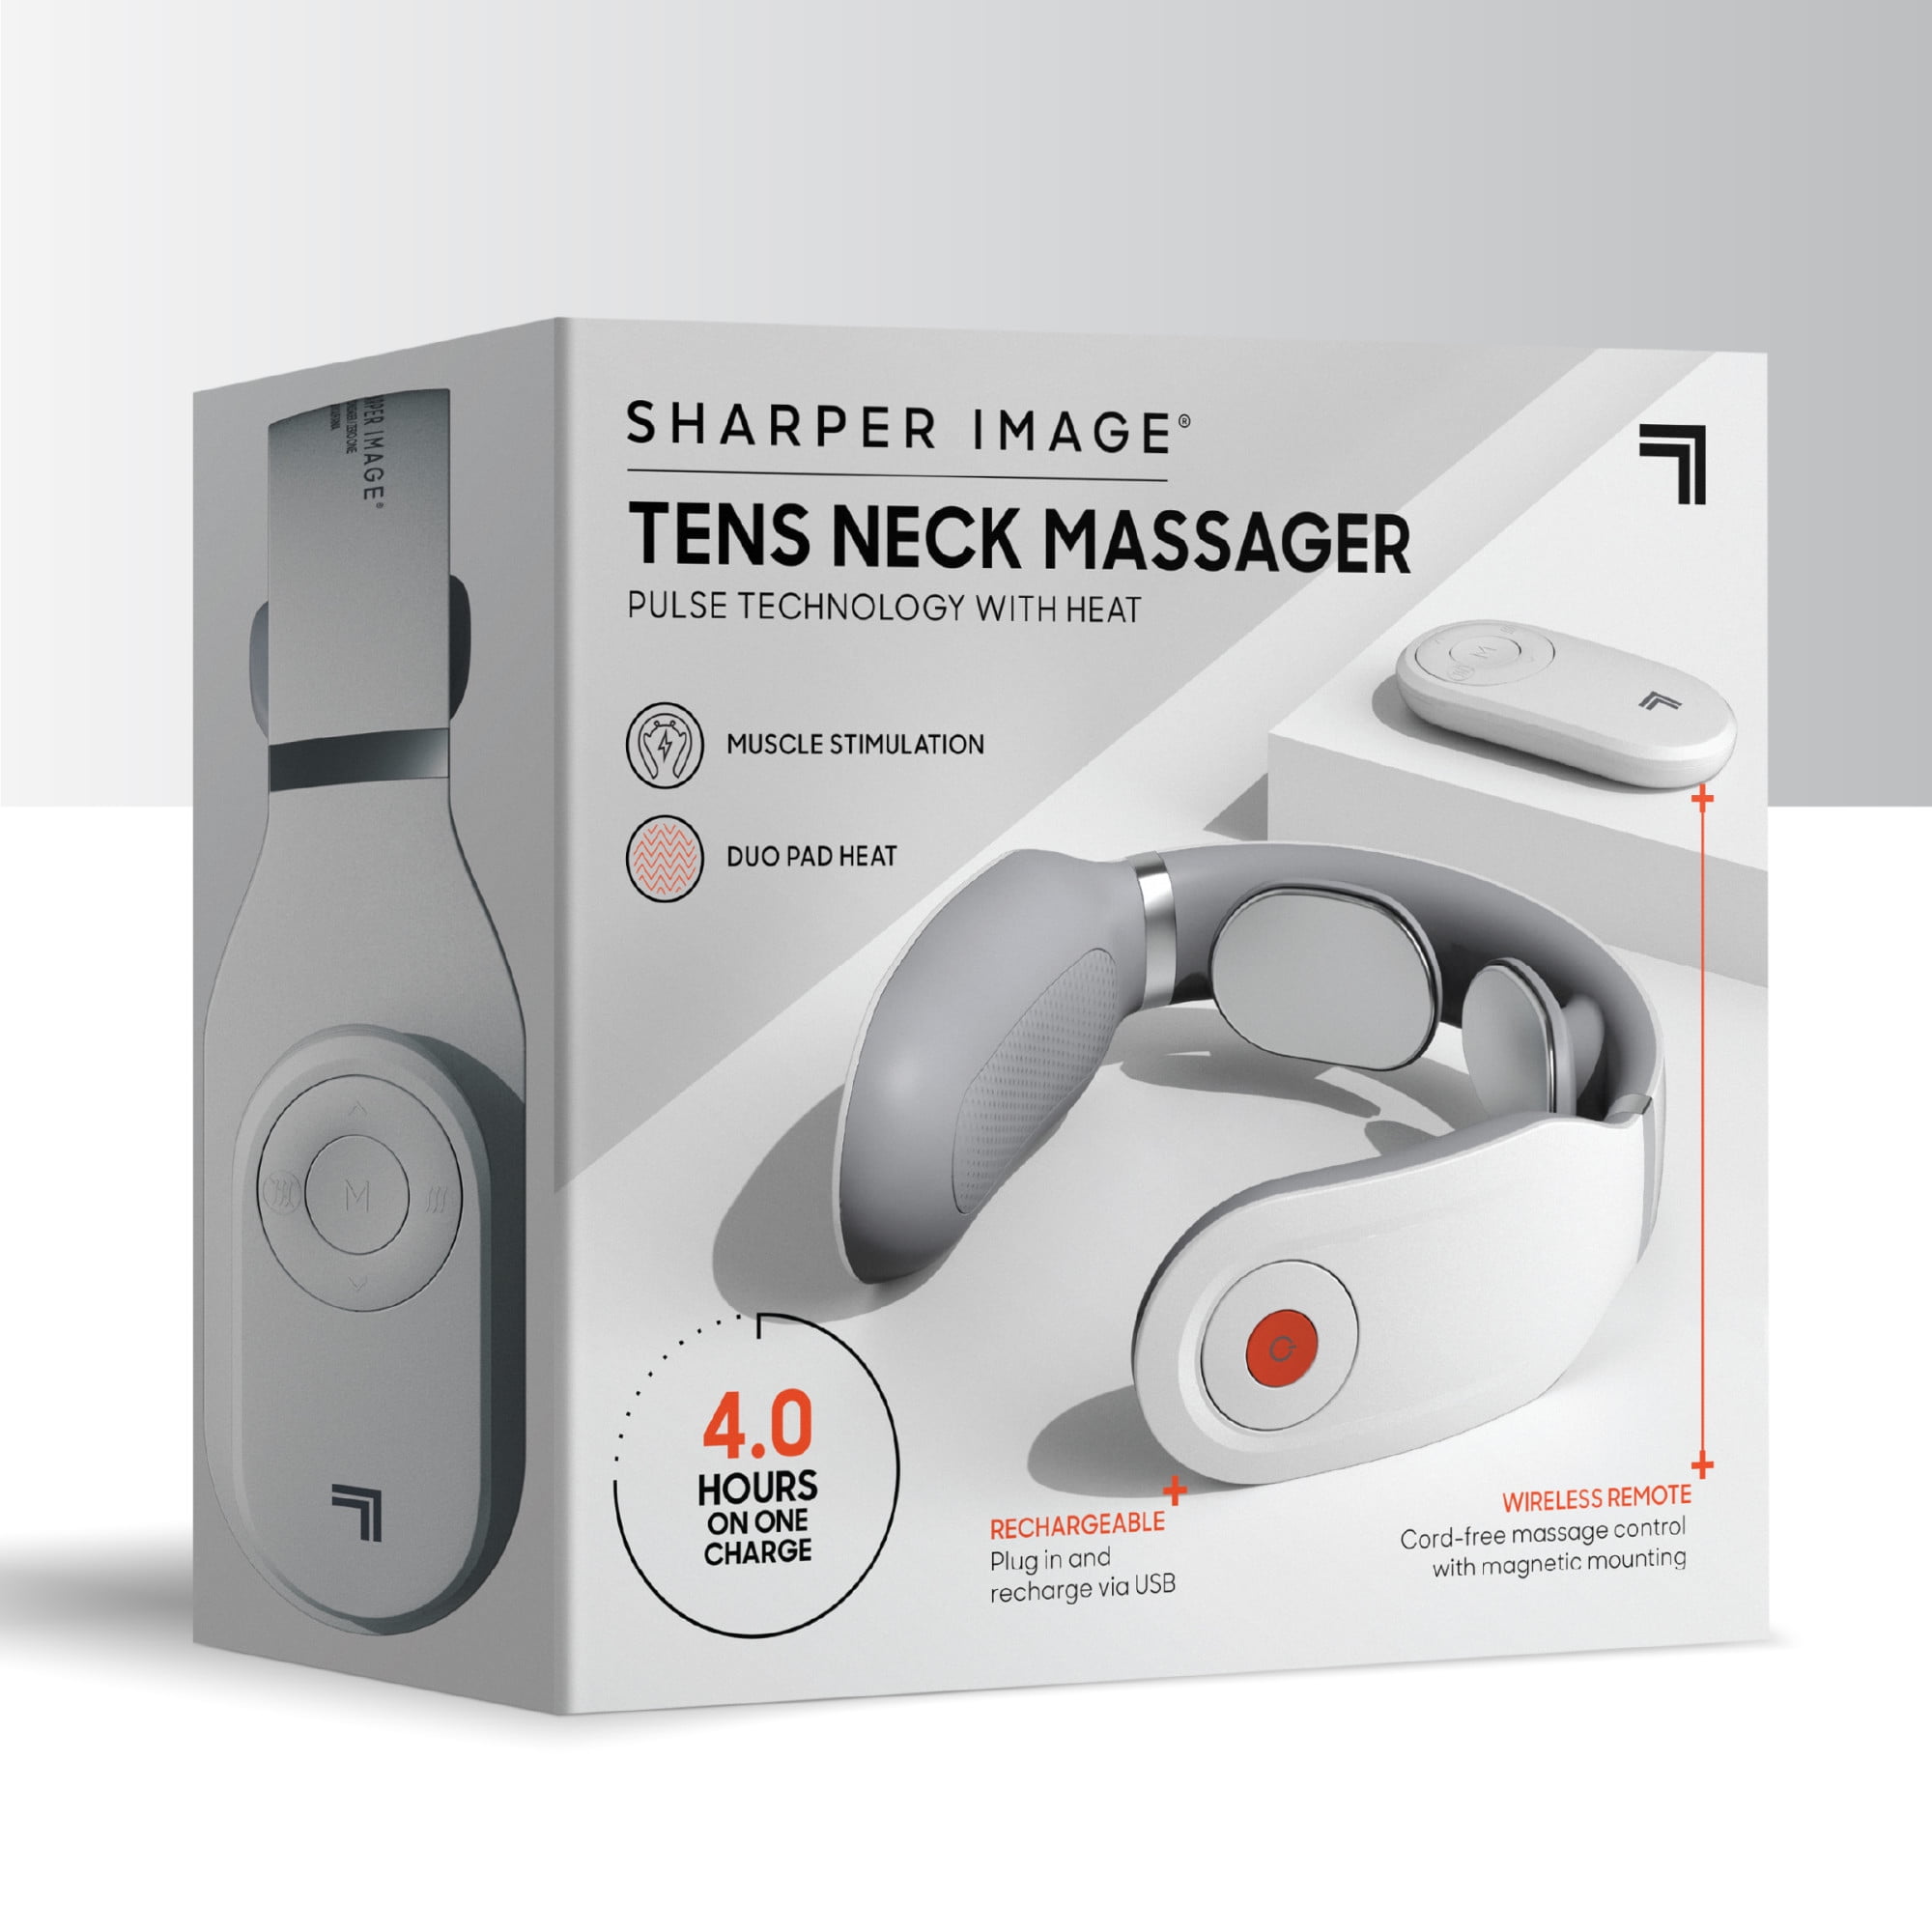  Sharper Image Neck Tens Muscle Stimulator with Soothing Heat &  Wireless Remote, Pain Relief Therapy with 3 Massage Modes & 15 Intensity  Levels, USB Rechargeable, 4 Hour Battery Life : Health & Household